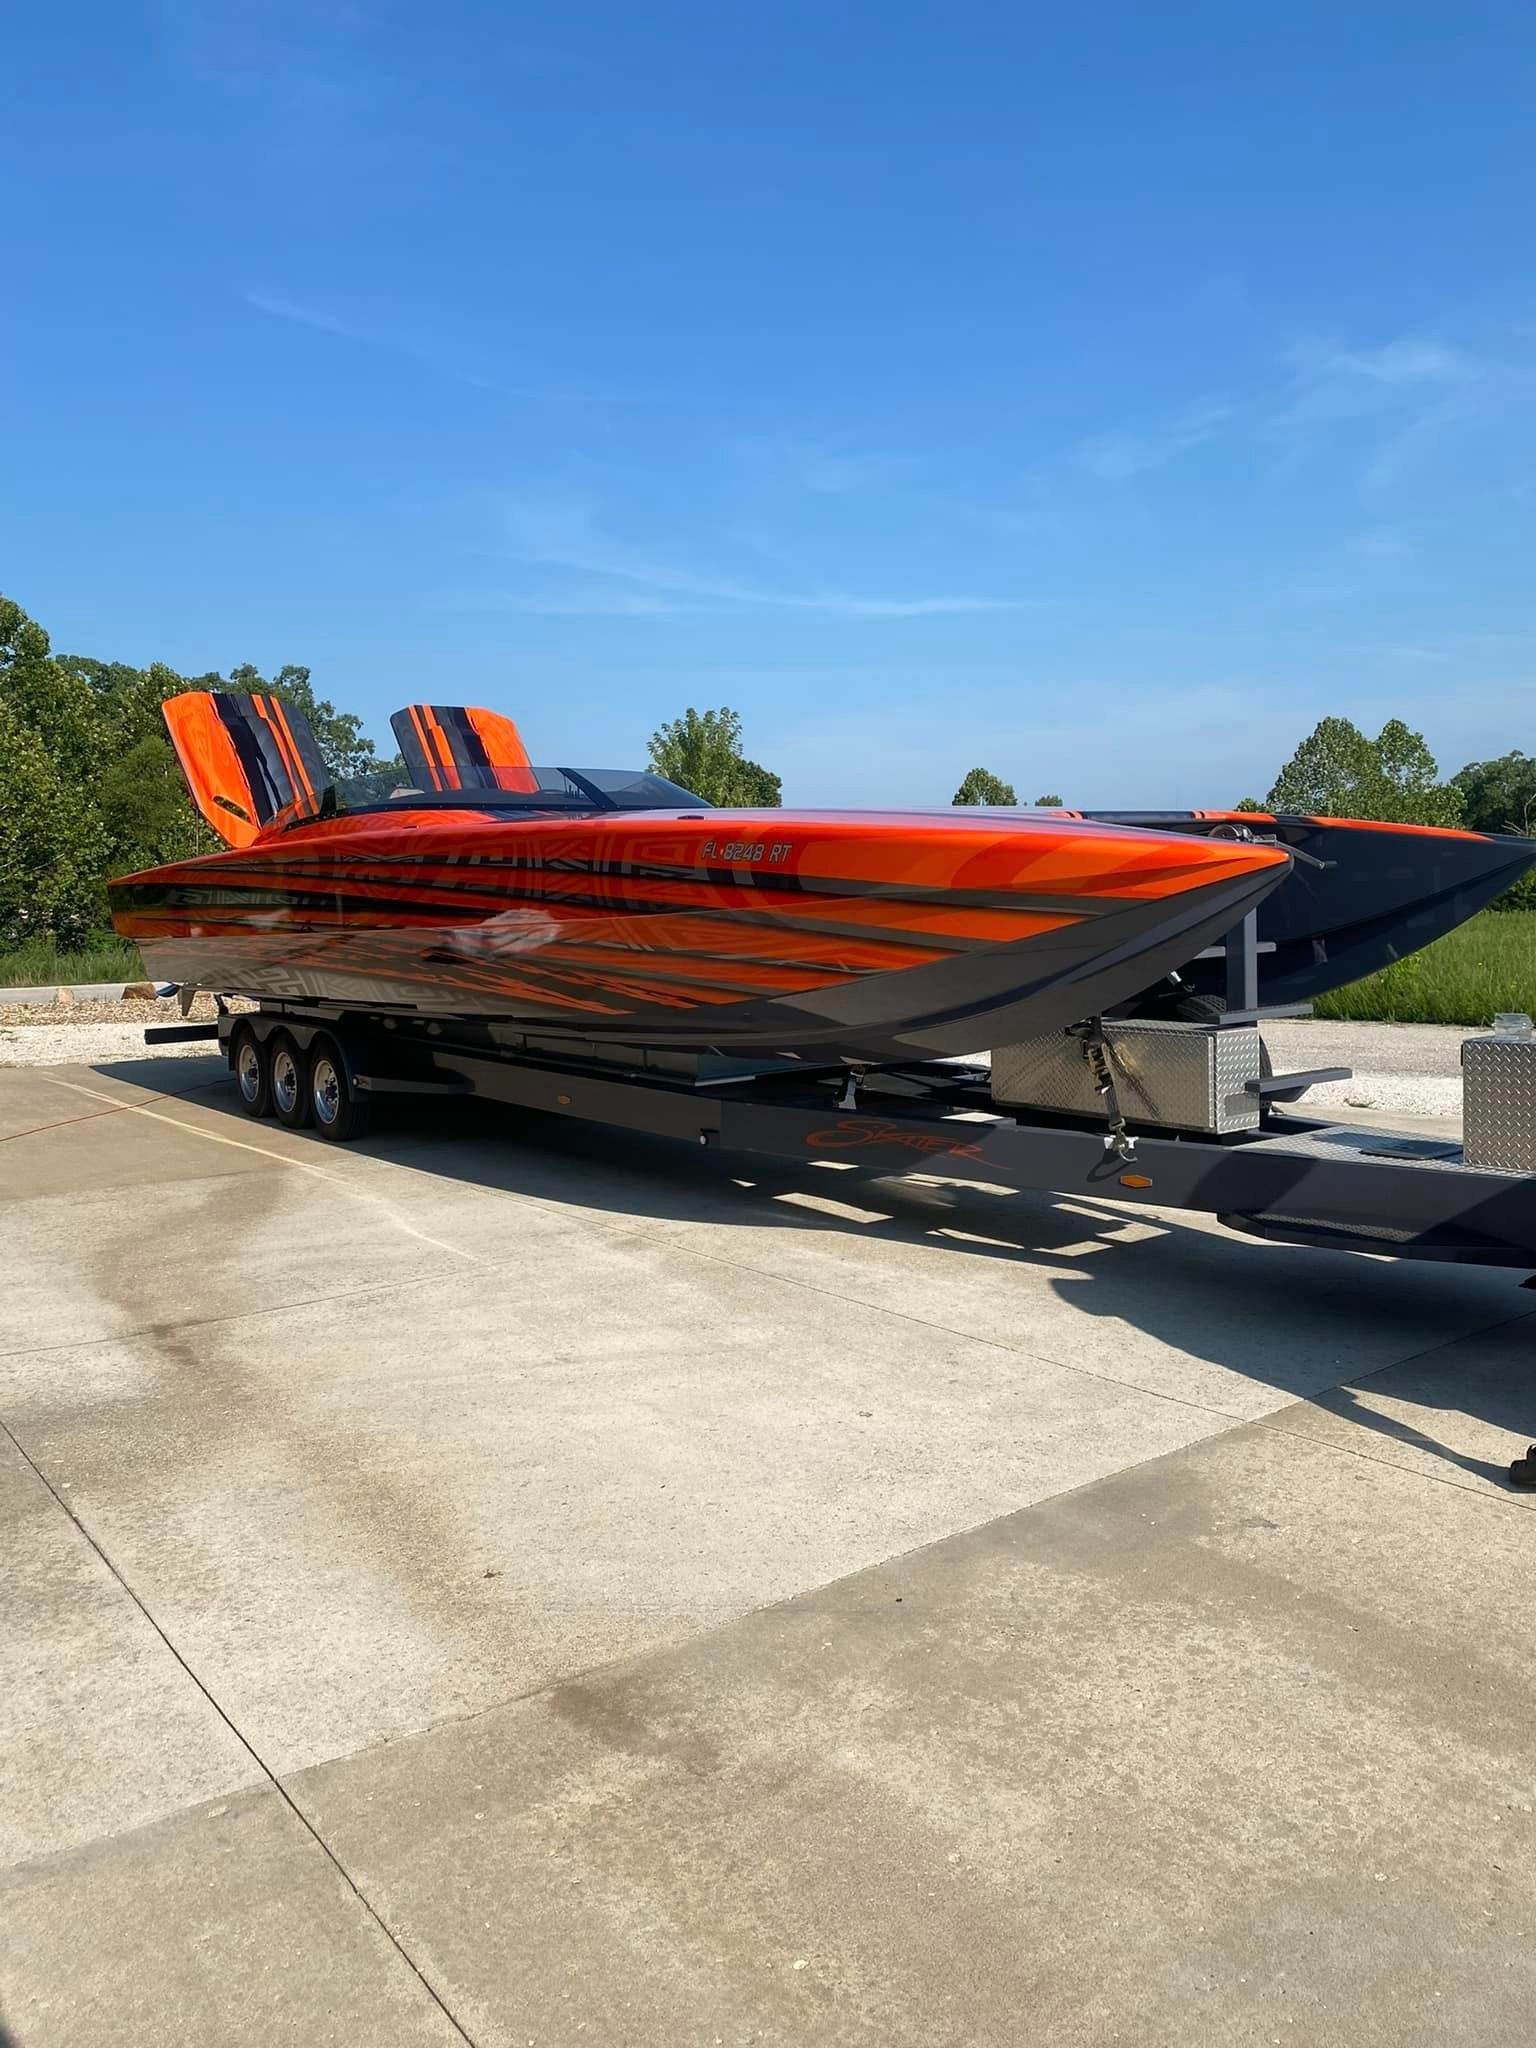 skater powerboats 388 for sale